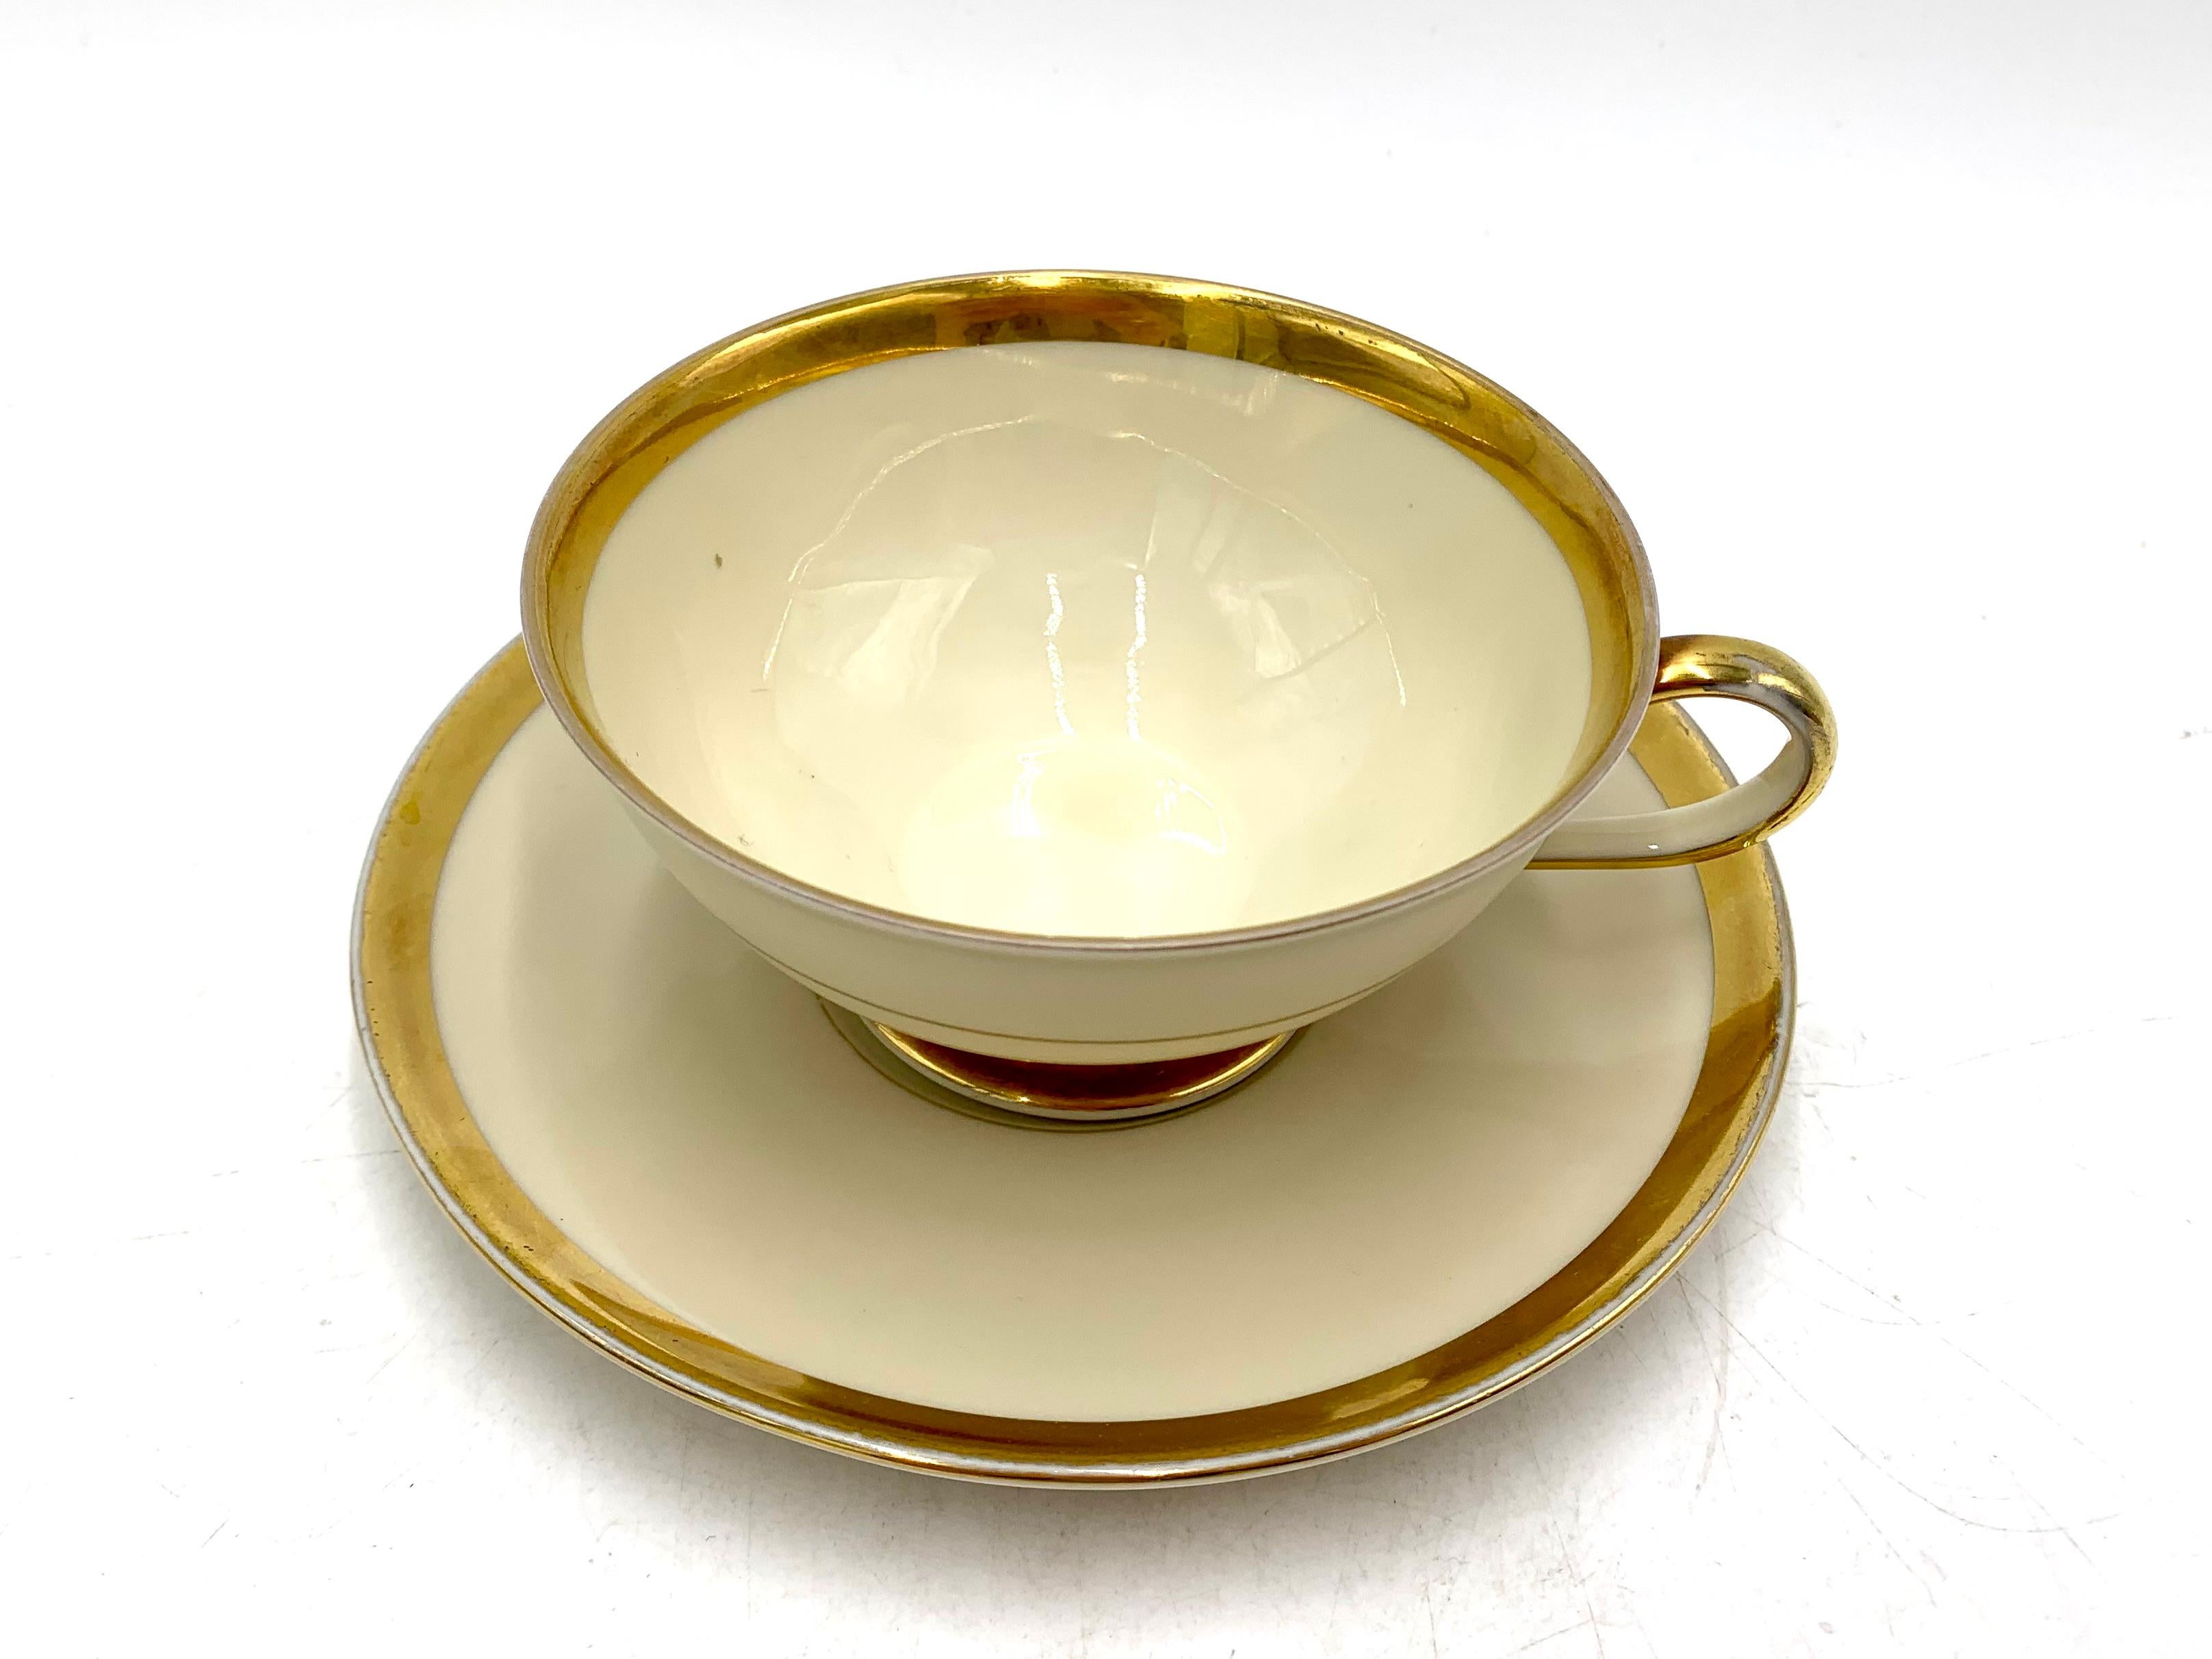 Coffee cup and saucer in ecru bone color with gilding on the edges.

Signed Hutschenreuther Selb. Mark used in 1939-1965.

Very good condition with no damage.

cup: height 5 cm, diameter 10.5 cm

saucer: diameter 14.5 cm.